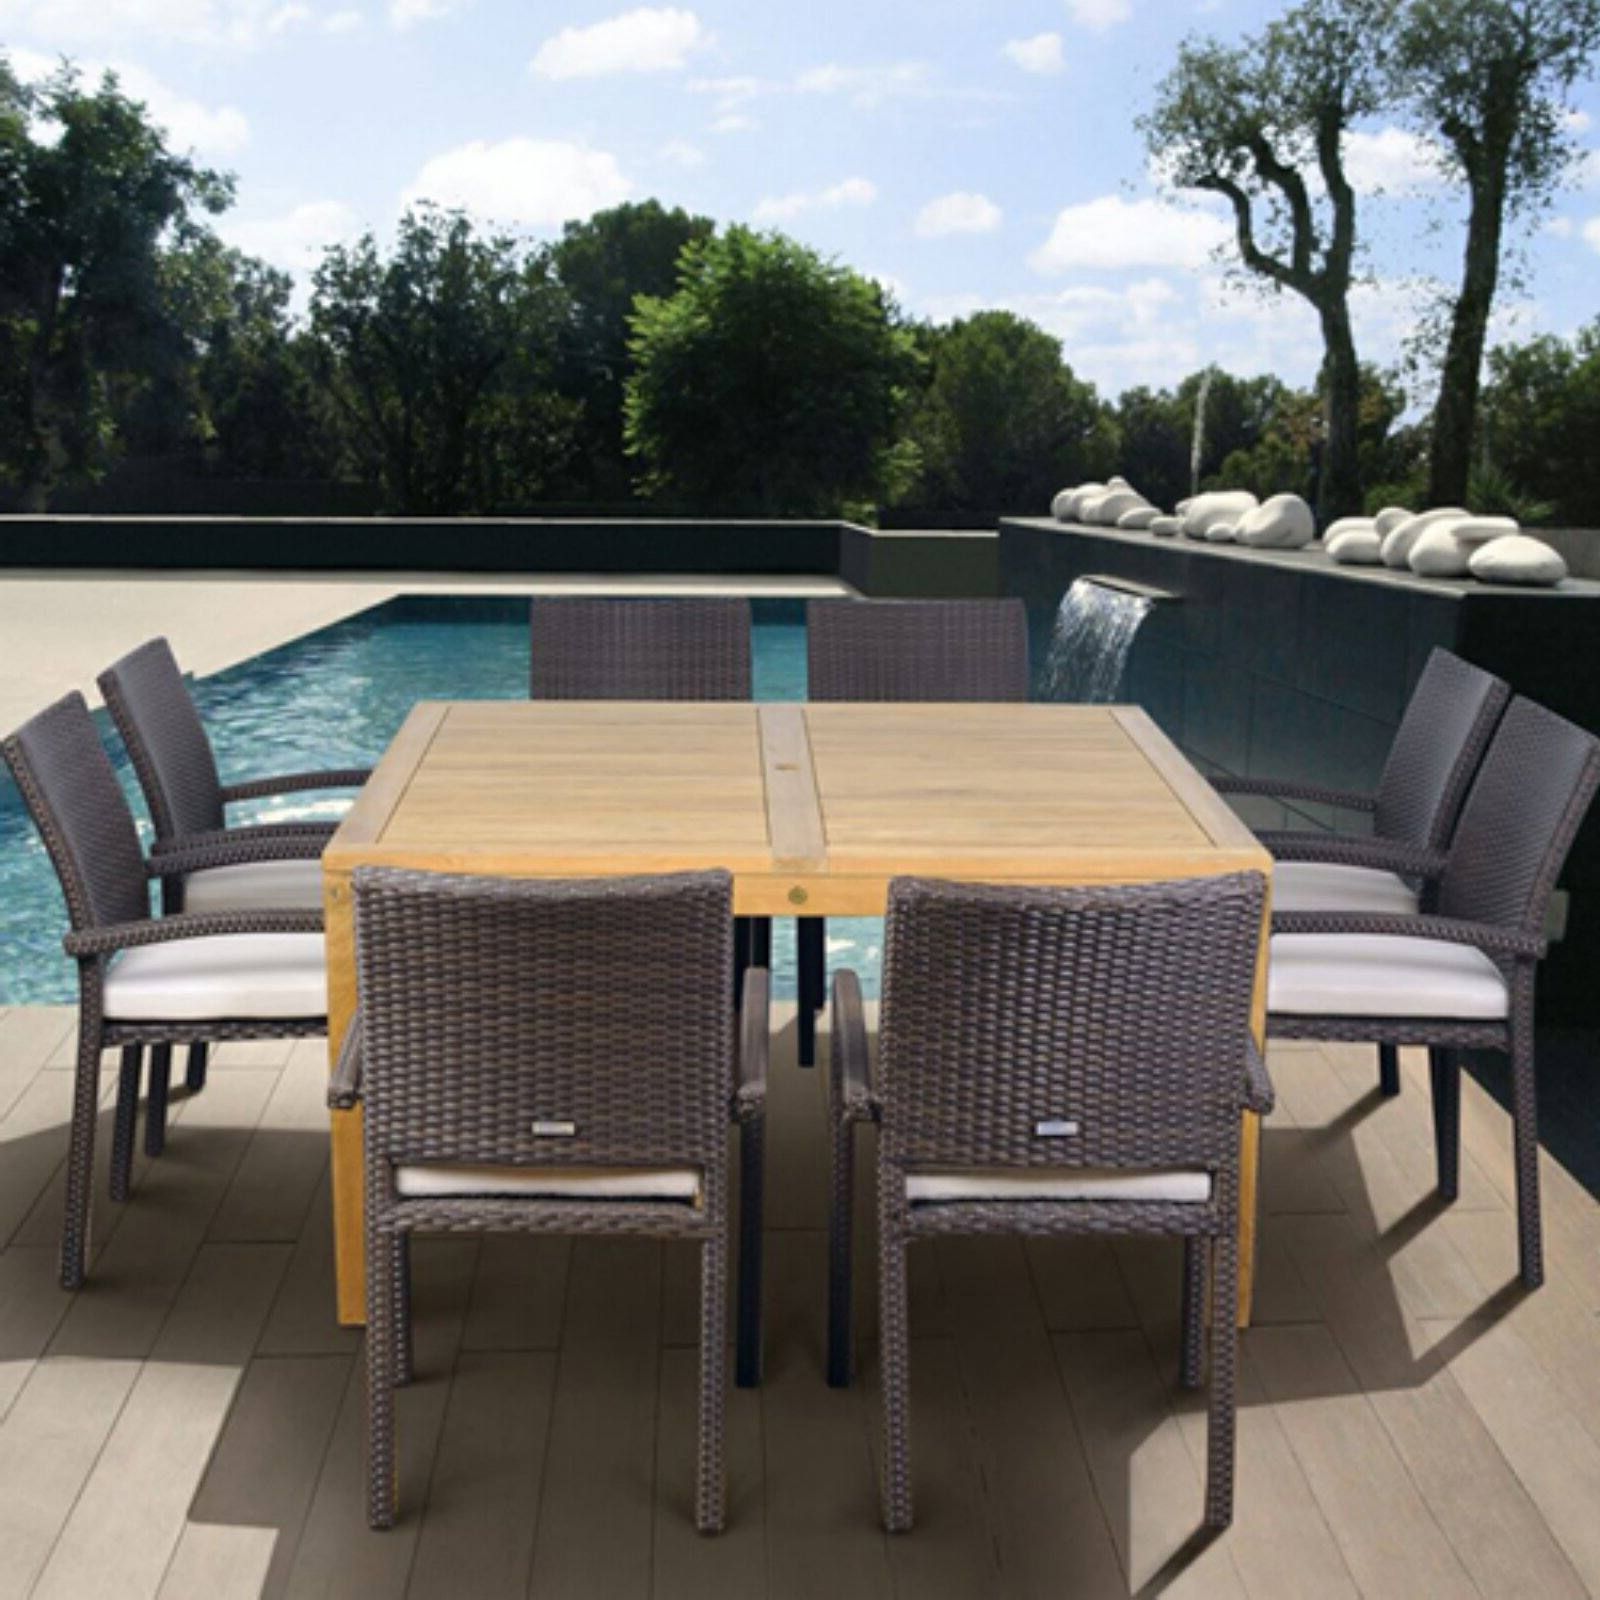 Amazonia Davenport 9 Piece Teak/wicker Square Patio Dining Set With Popular 9 Piece Square Patio Dining Sets (View 7 of 15)